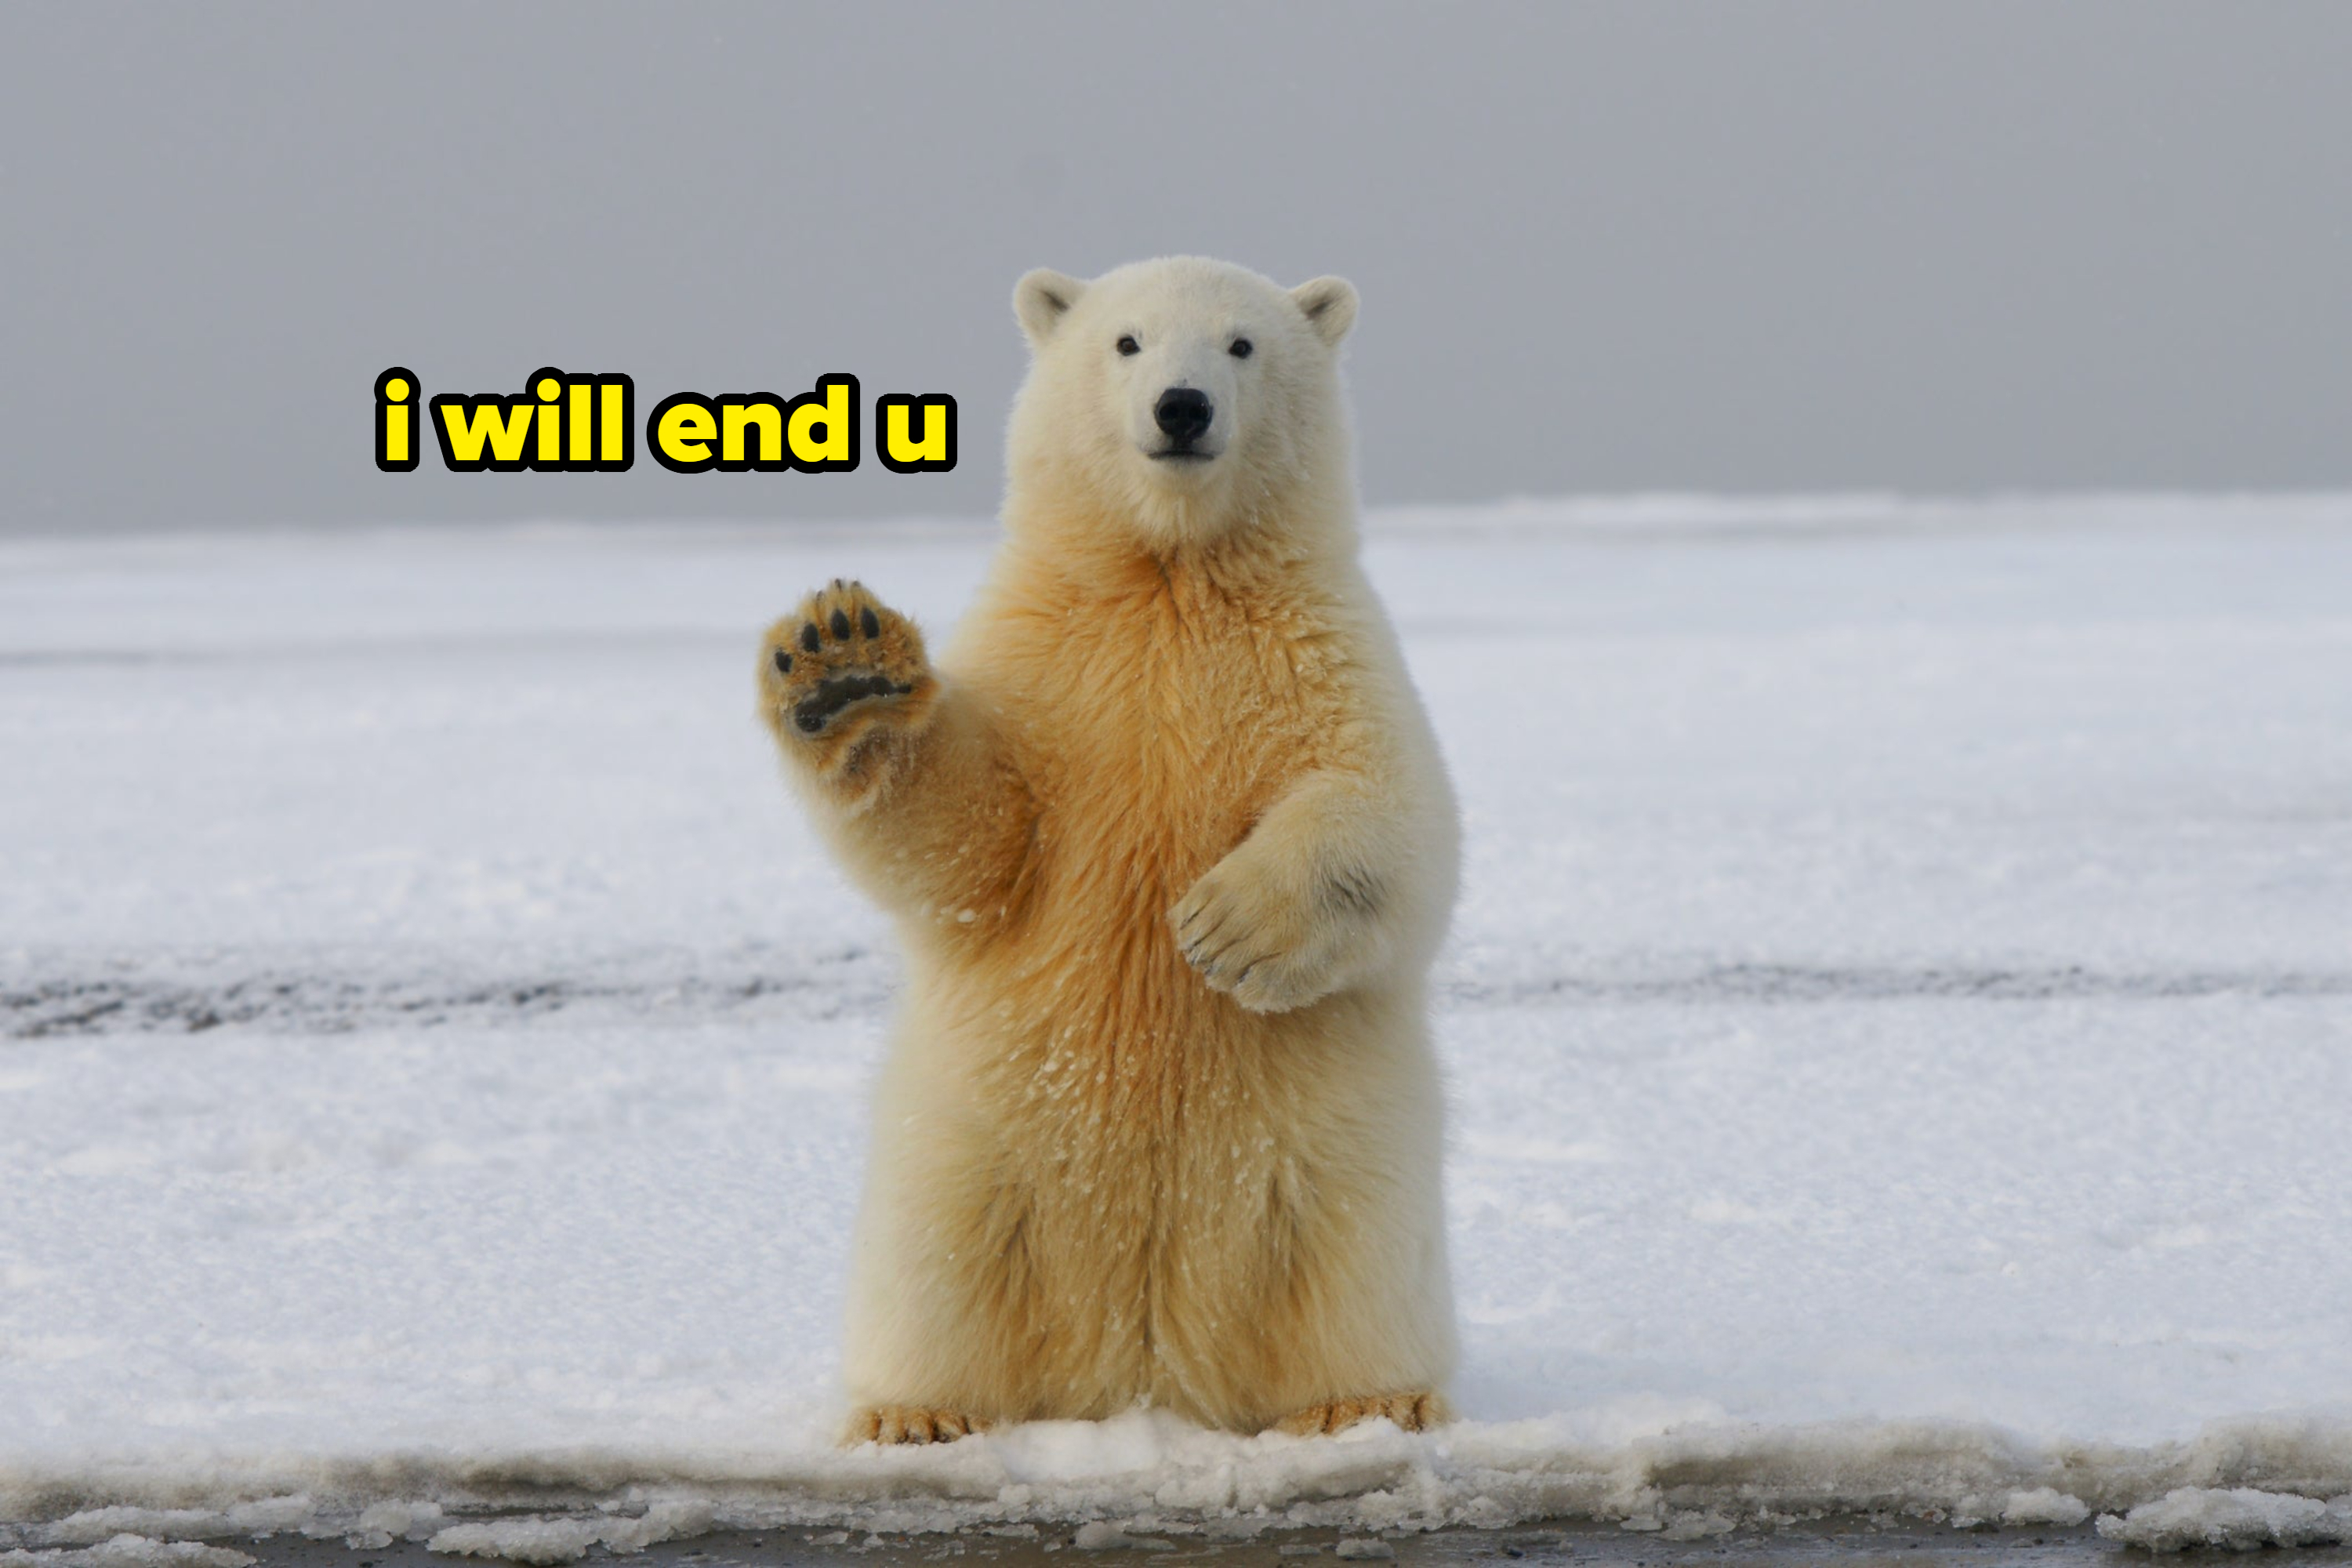 Polar bear standing upright on ice waving with one paw